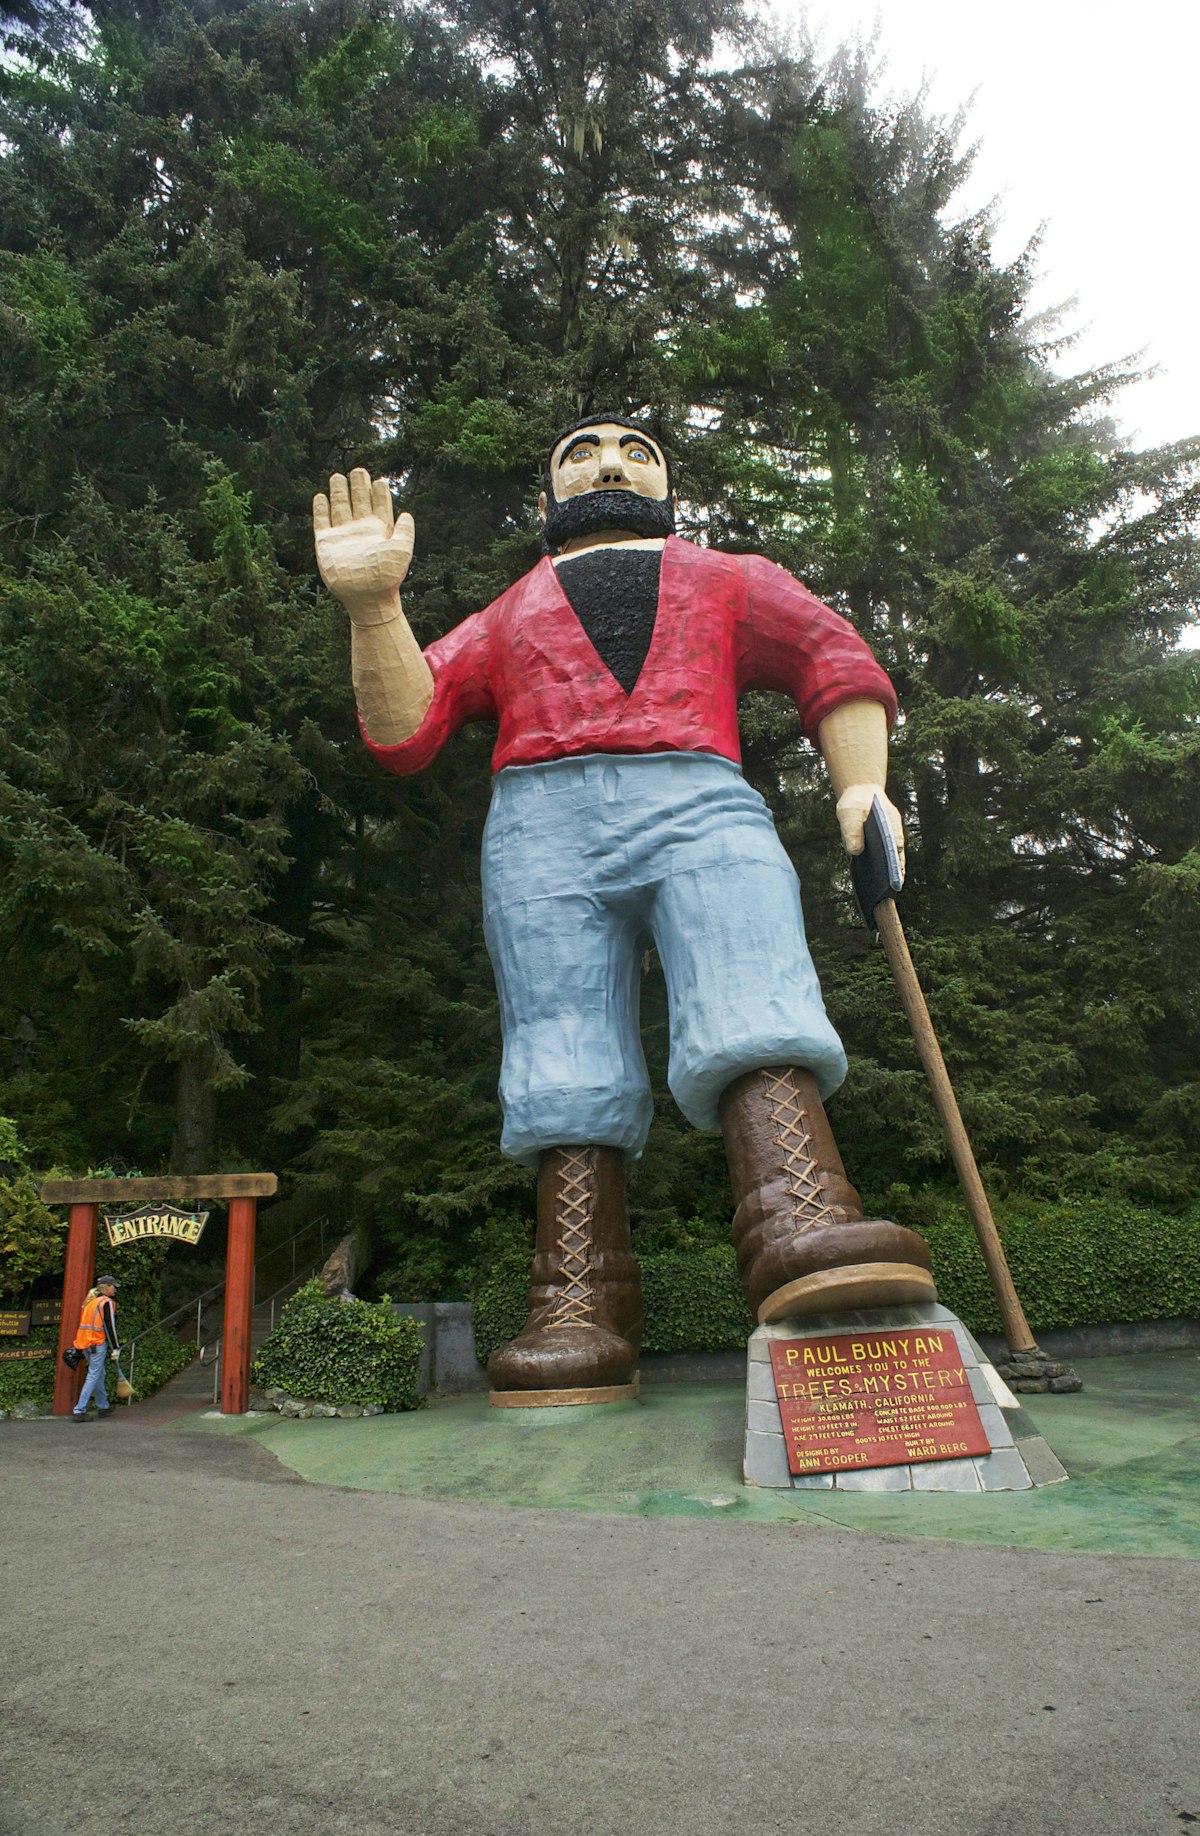 Paul Bunyan in parking lot at the Mystery of Trees. 42 feet tall. Woman at entrance gives a perspective to the size.